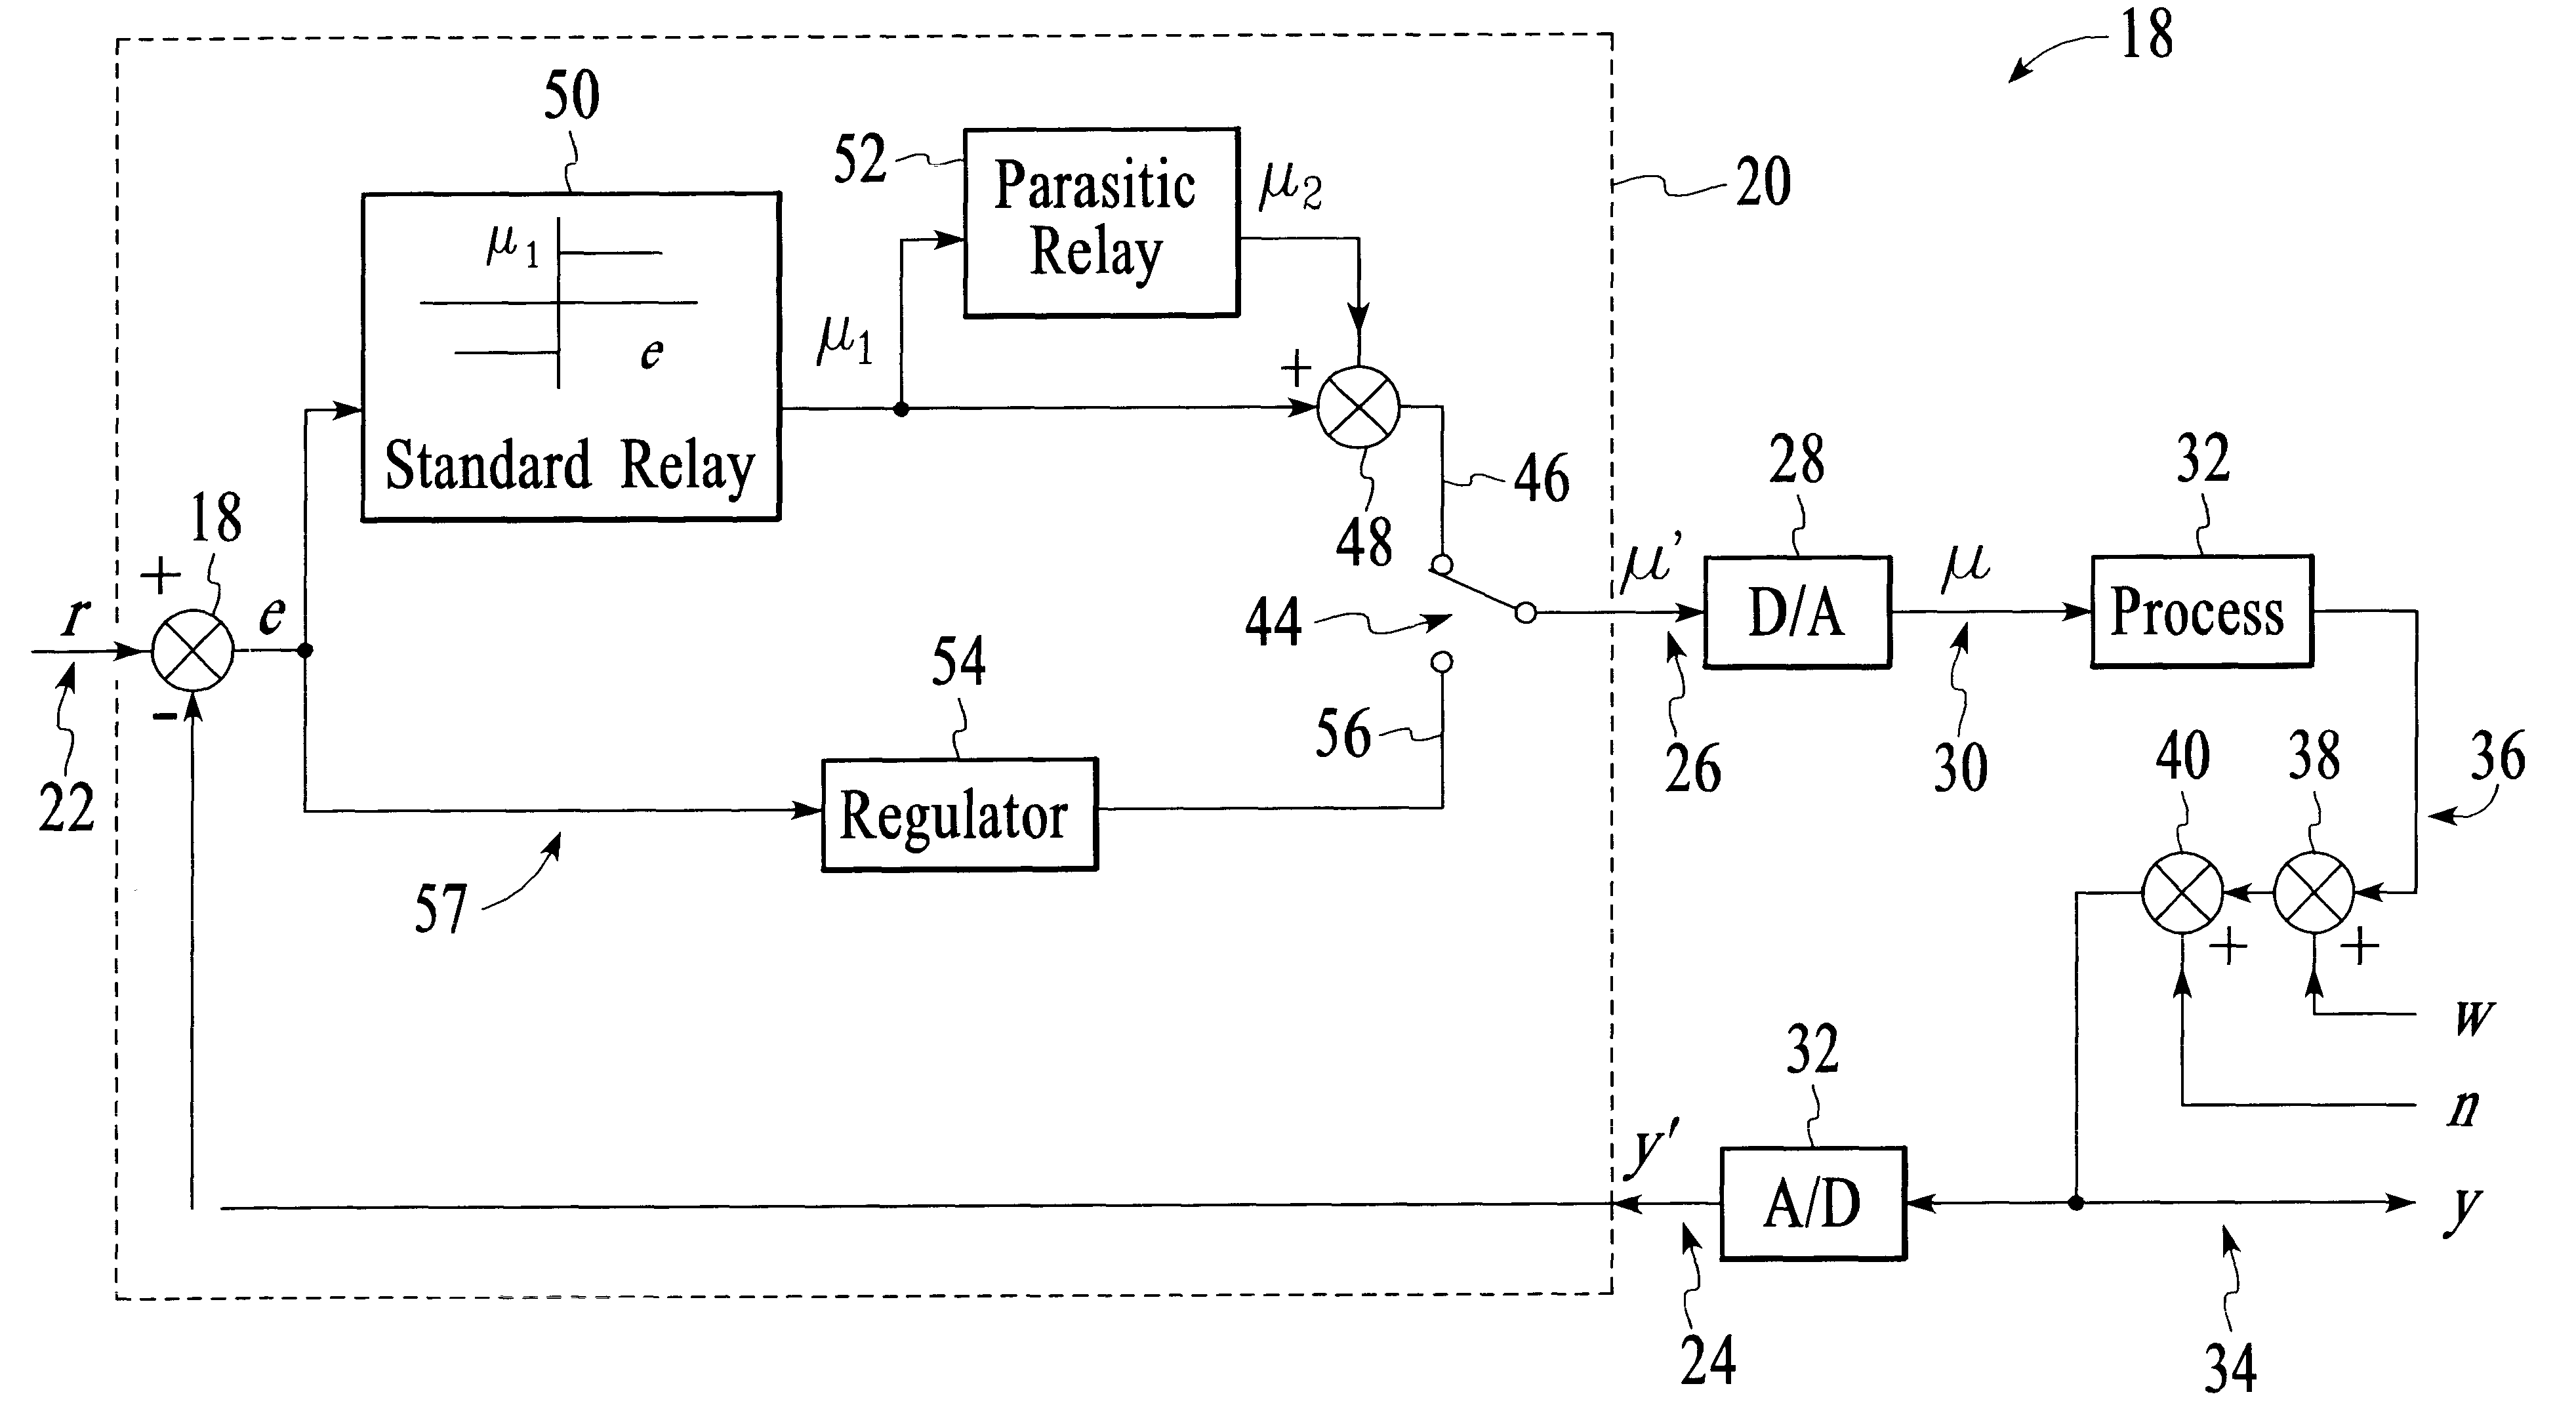 Apparatus for relay based multiple point process frequency response estimation and control tuning